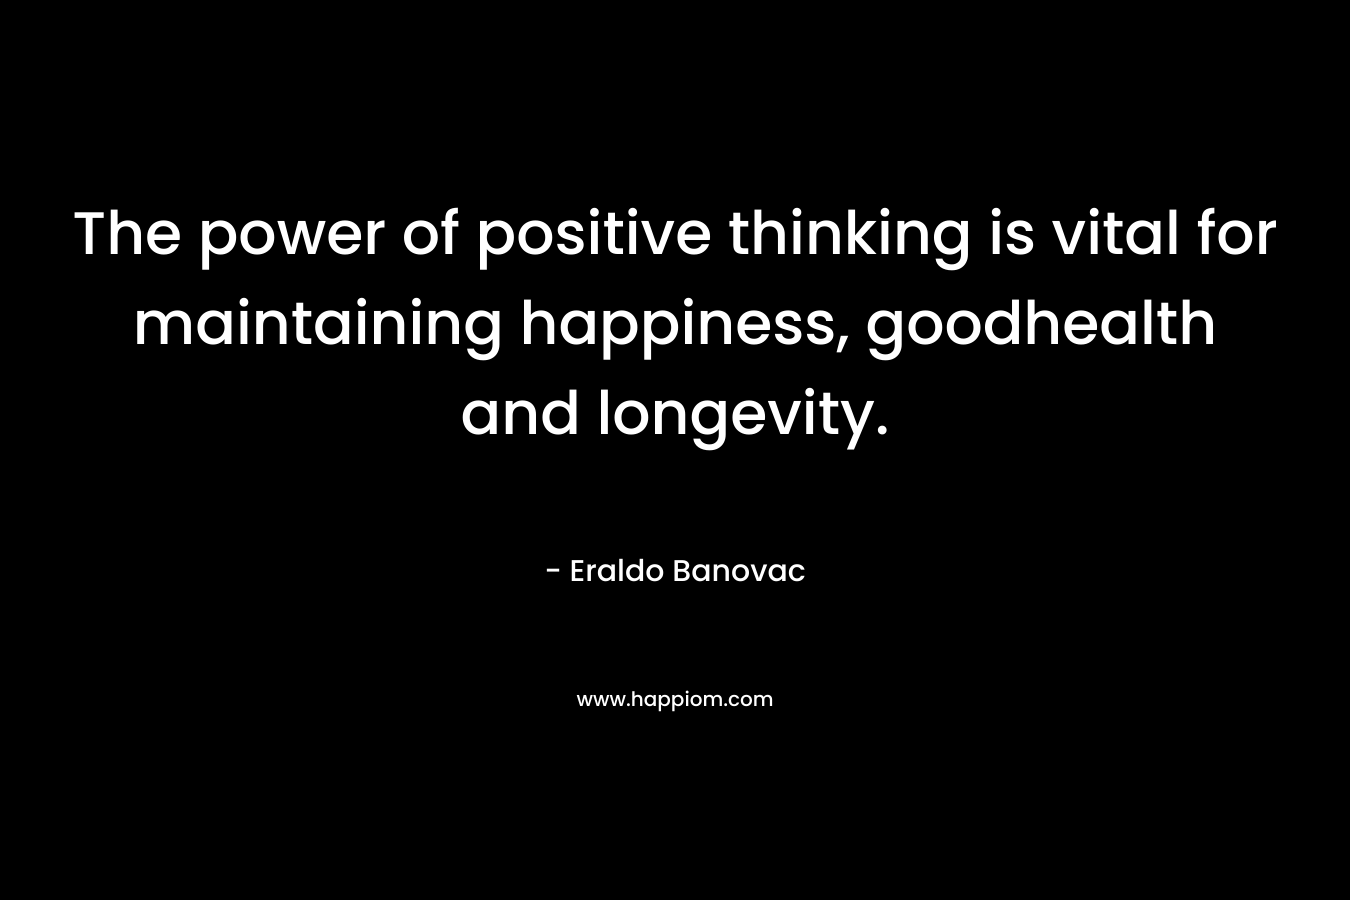 The power of positive thinking is vital for maintaining happiness, goodhealth and longevity.